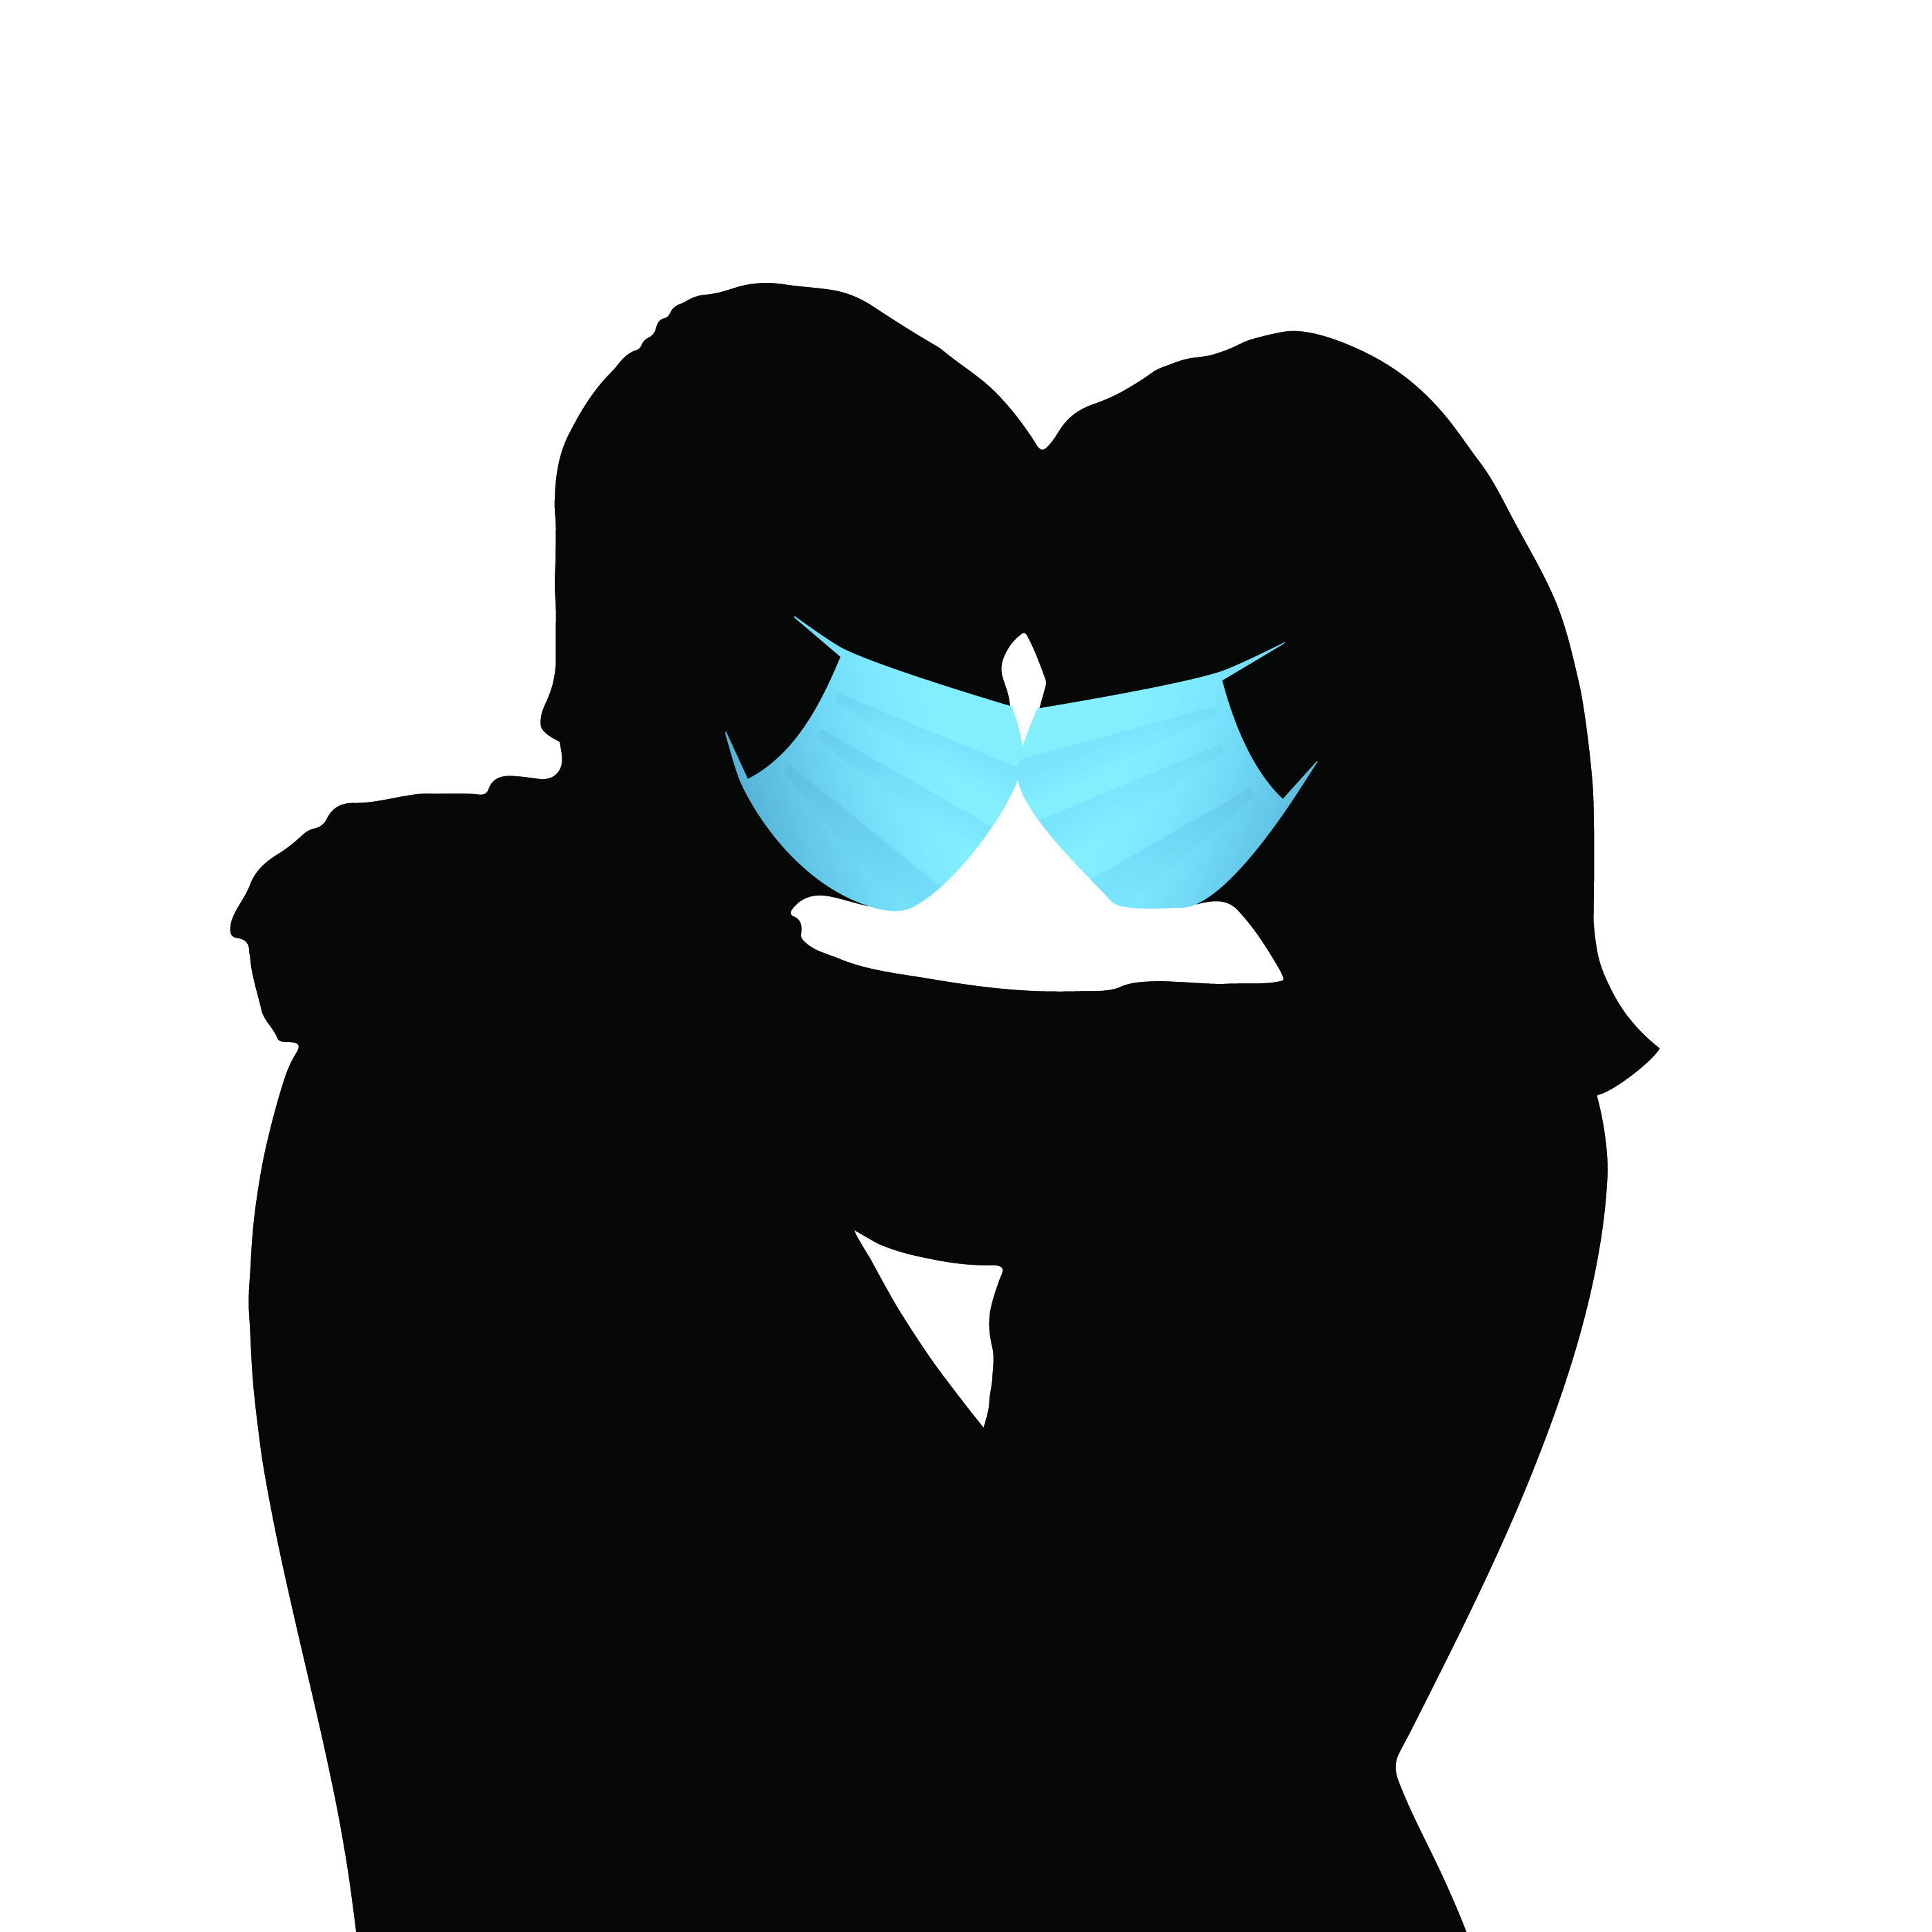 a silhouette of a man and a woman wearing masks kissing 